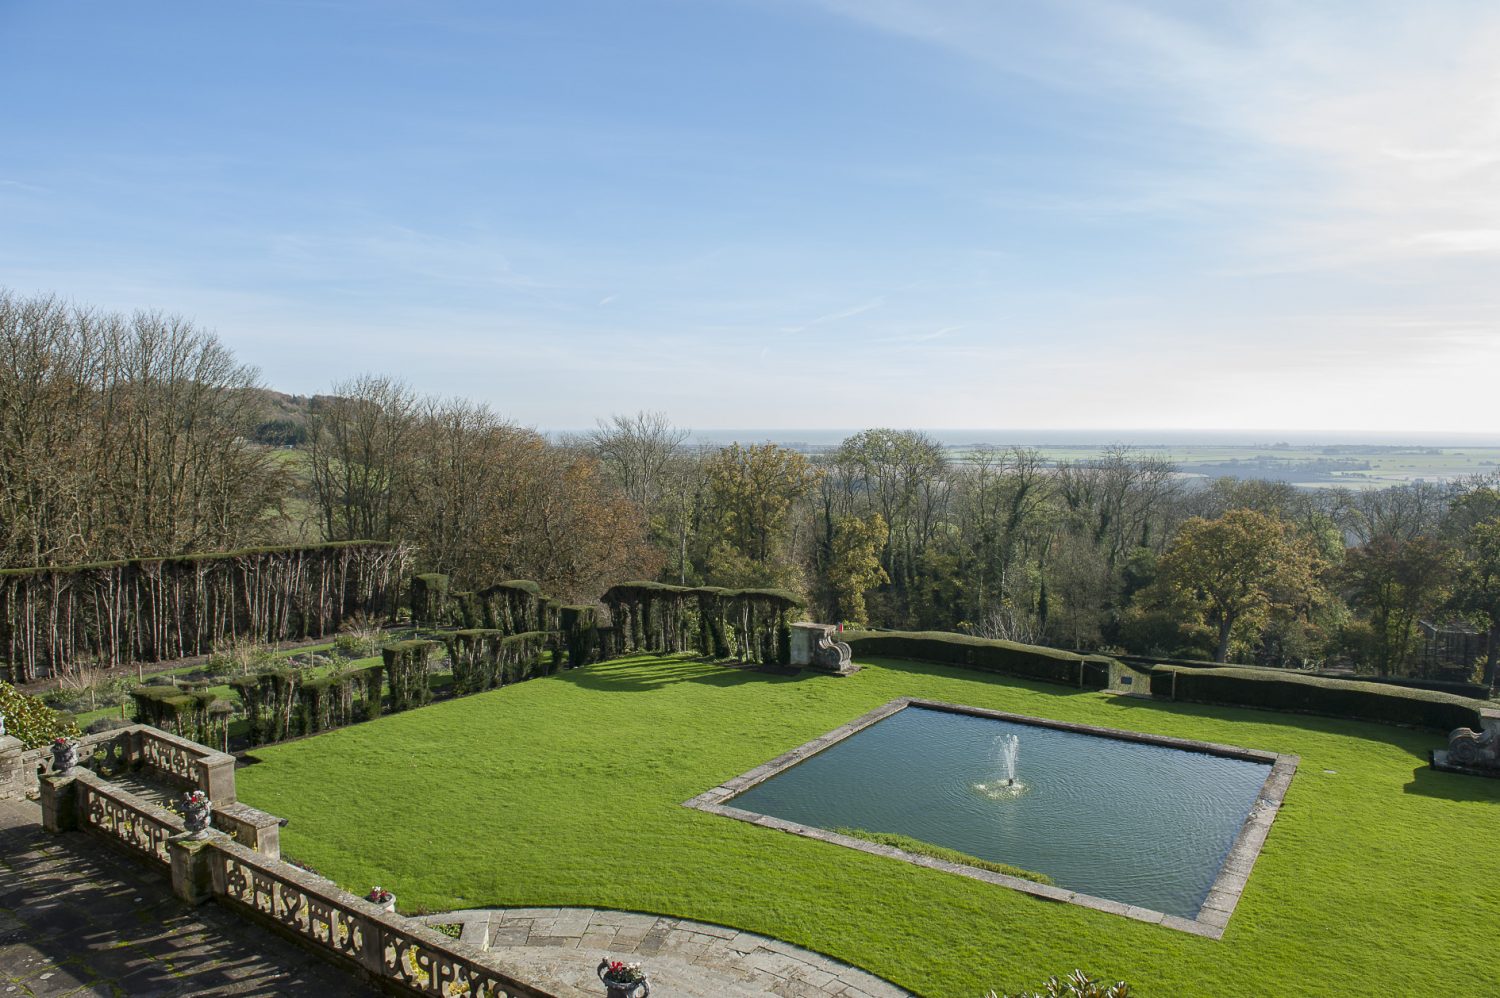 The bedrooms benefit from stunning views across the extensive gardens and out towards the sea. The grounds have been restored to virtually their former glory